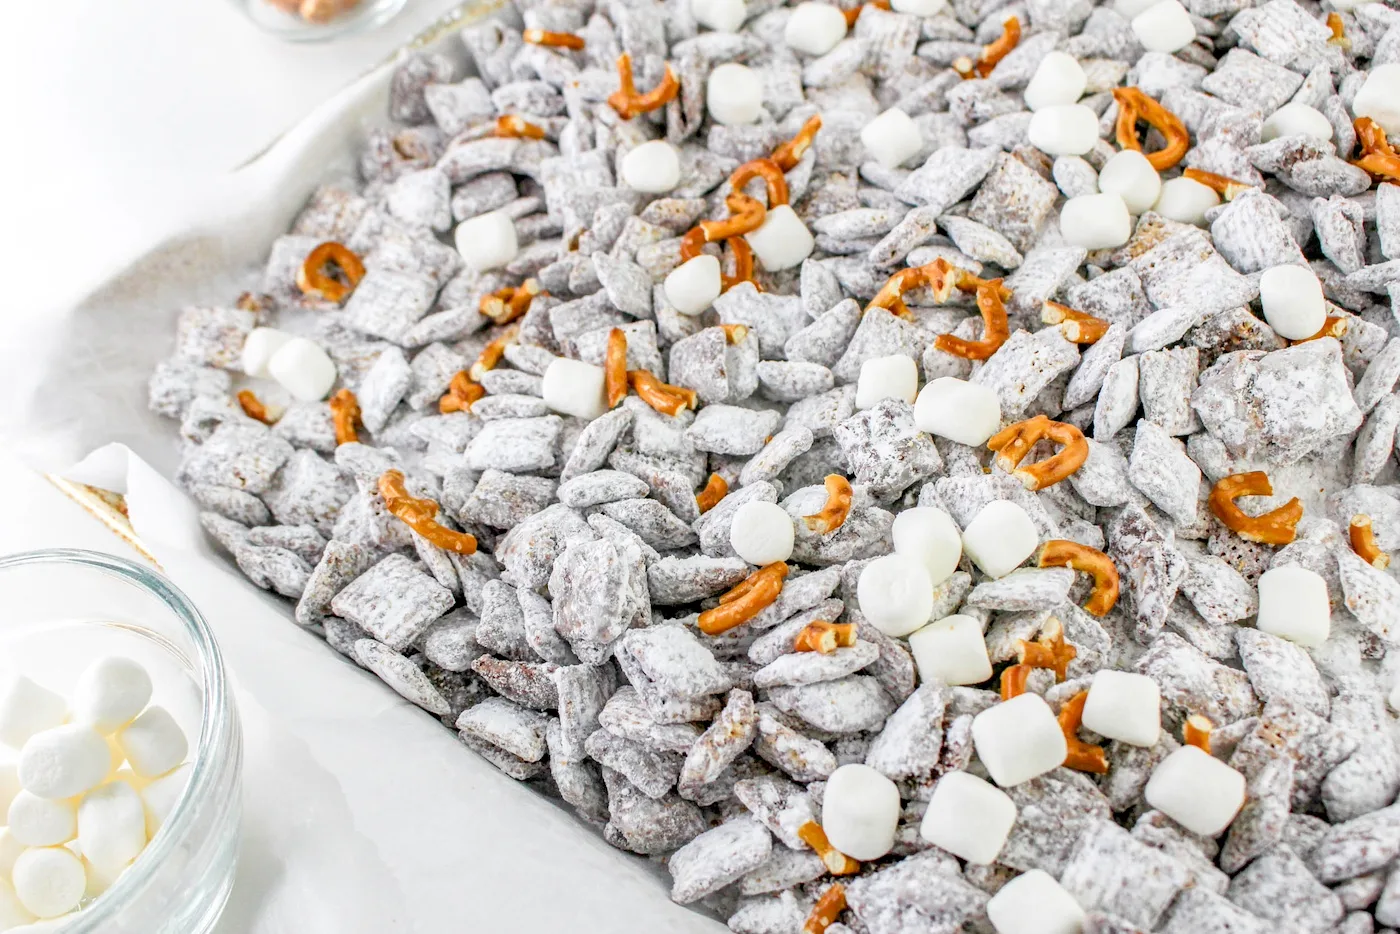 Coated cereal spread onto a baking sheet